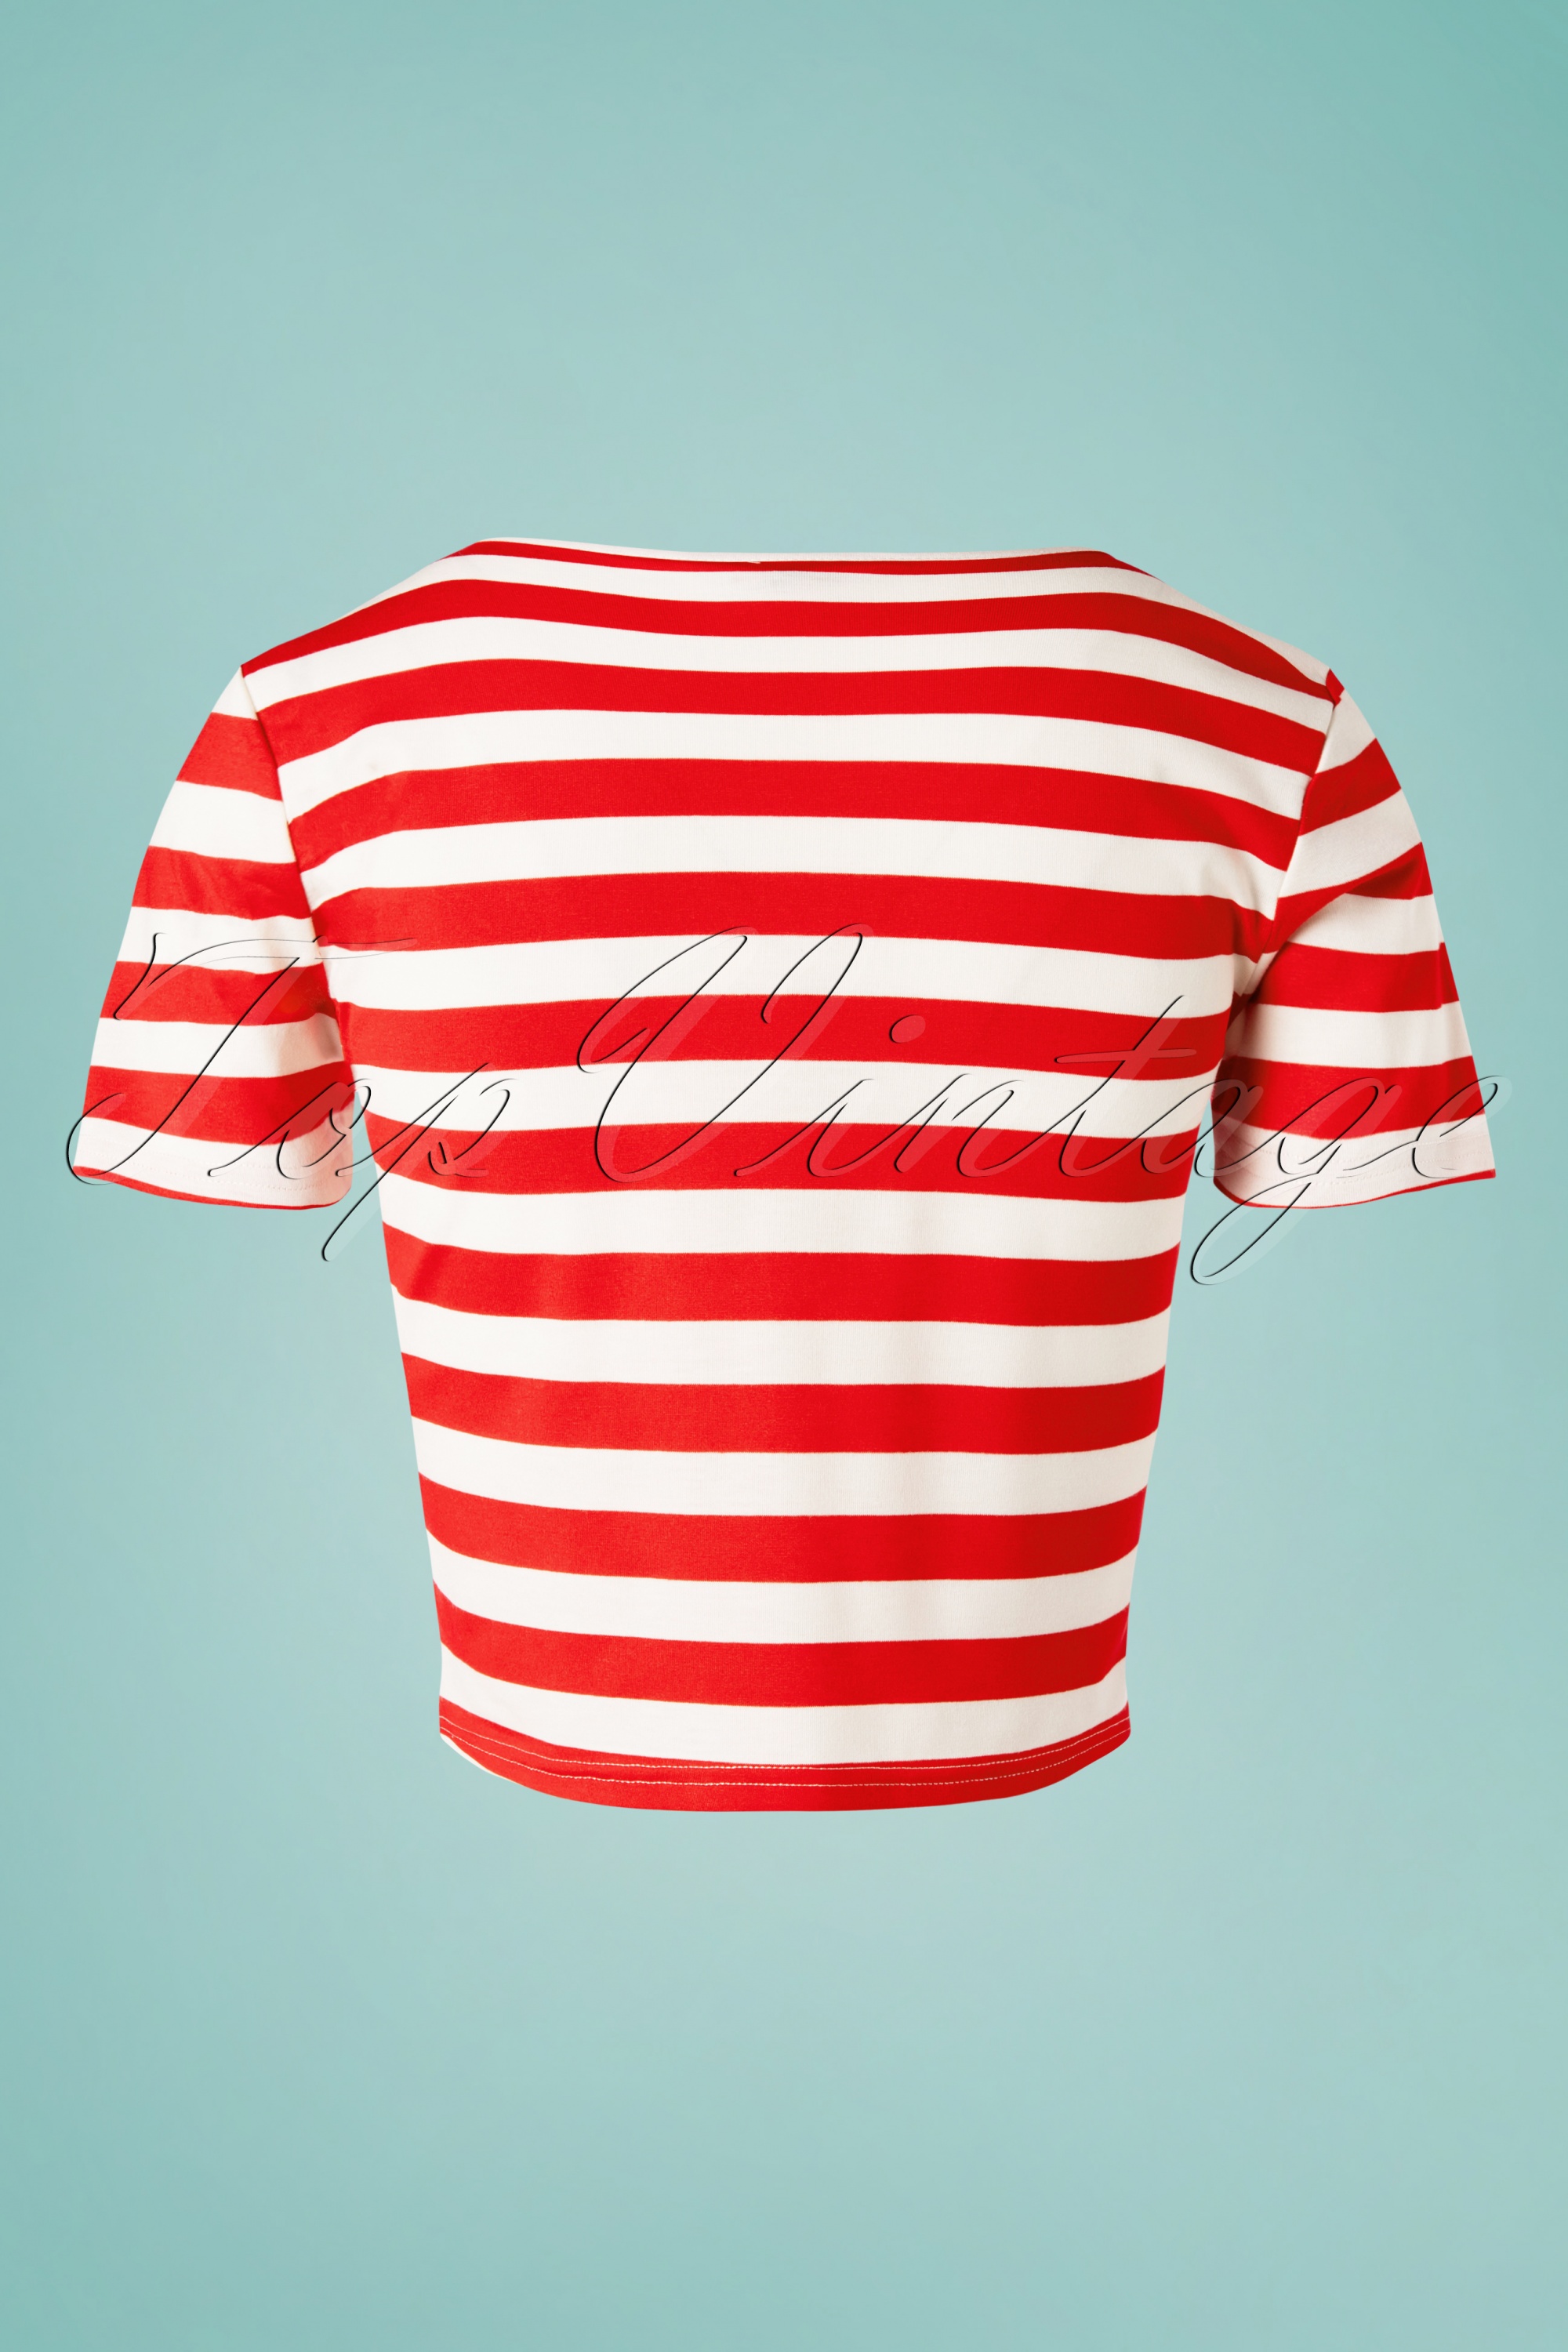 Banned Retro - Land Ahoy crop t-shirt in rood en wit 4